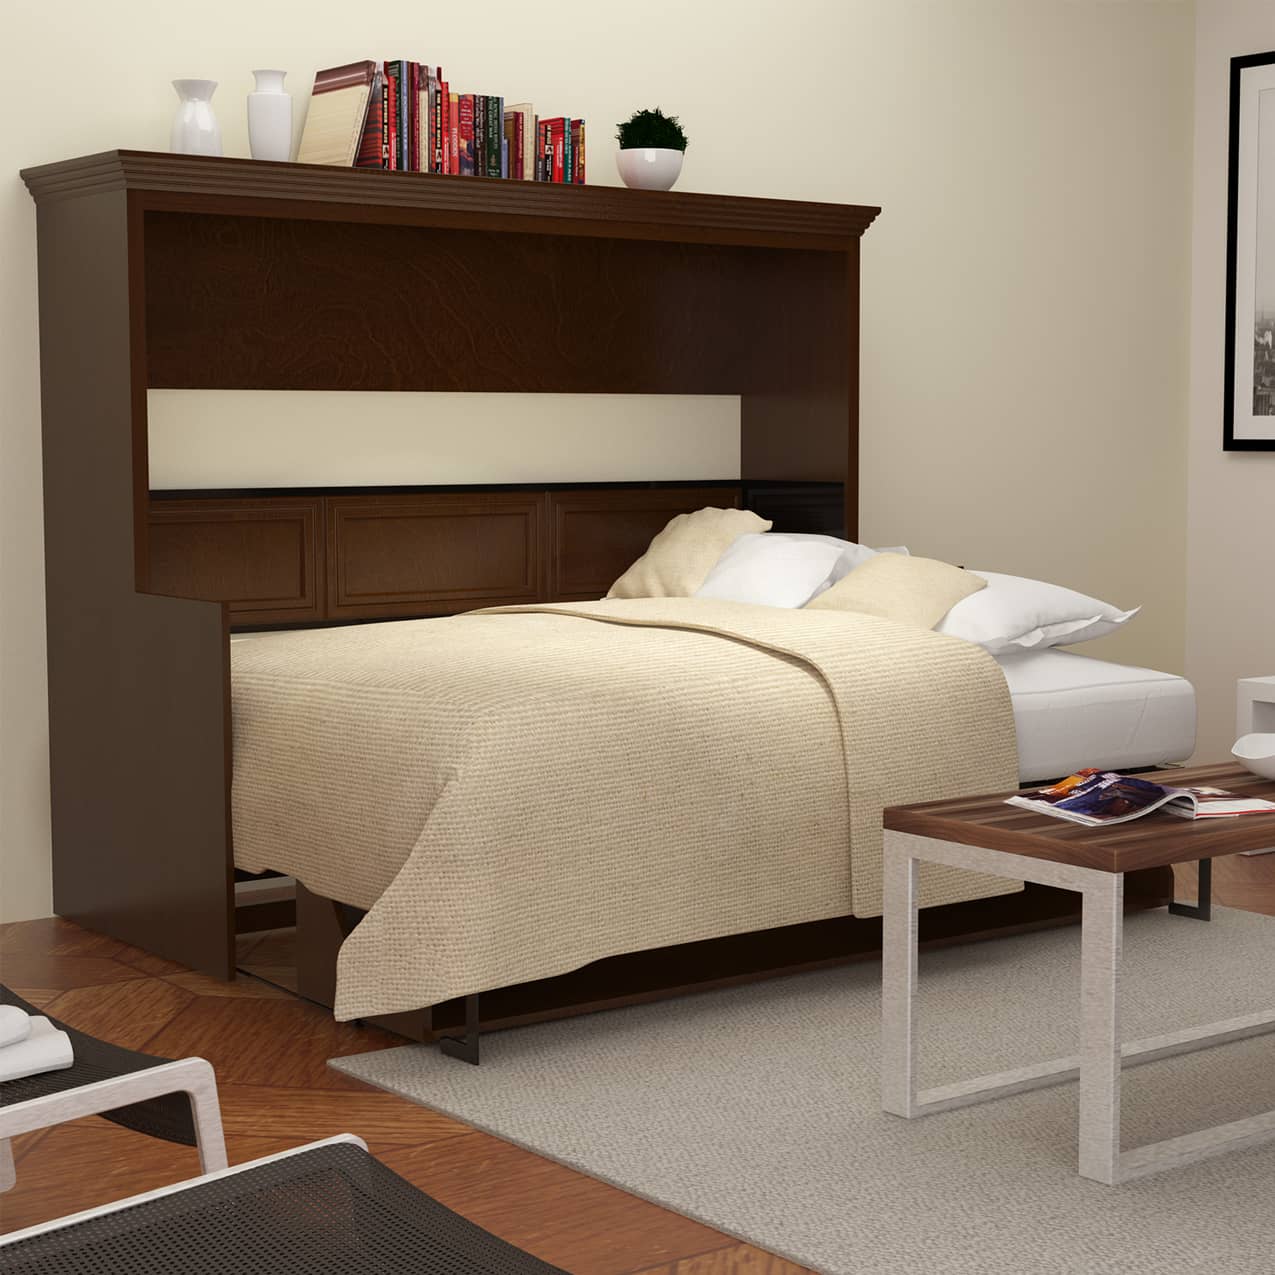 chamberlin full horizontal murphy bed with desk cabinet open hidden hideaway hide away hide-a-way diy murphy bed kit fold out pull down wall bed cabinet desk bed combo home office guest bed